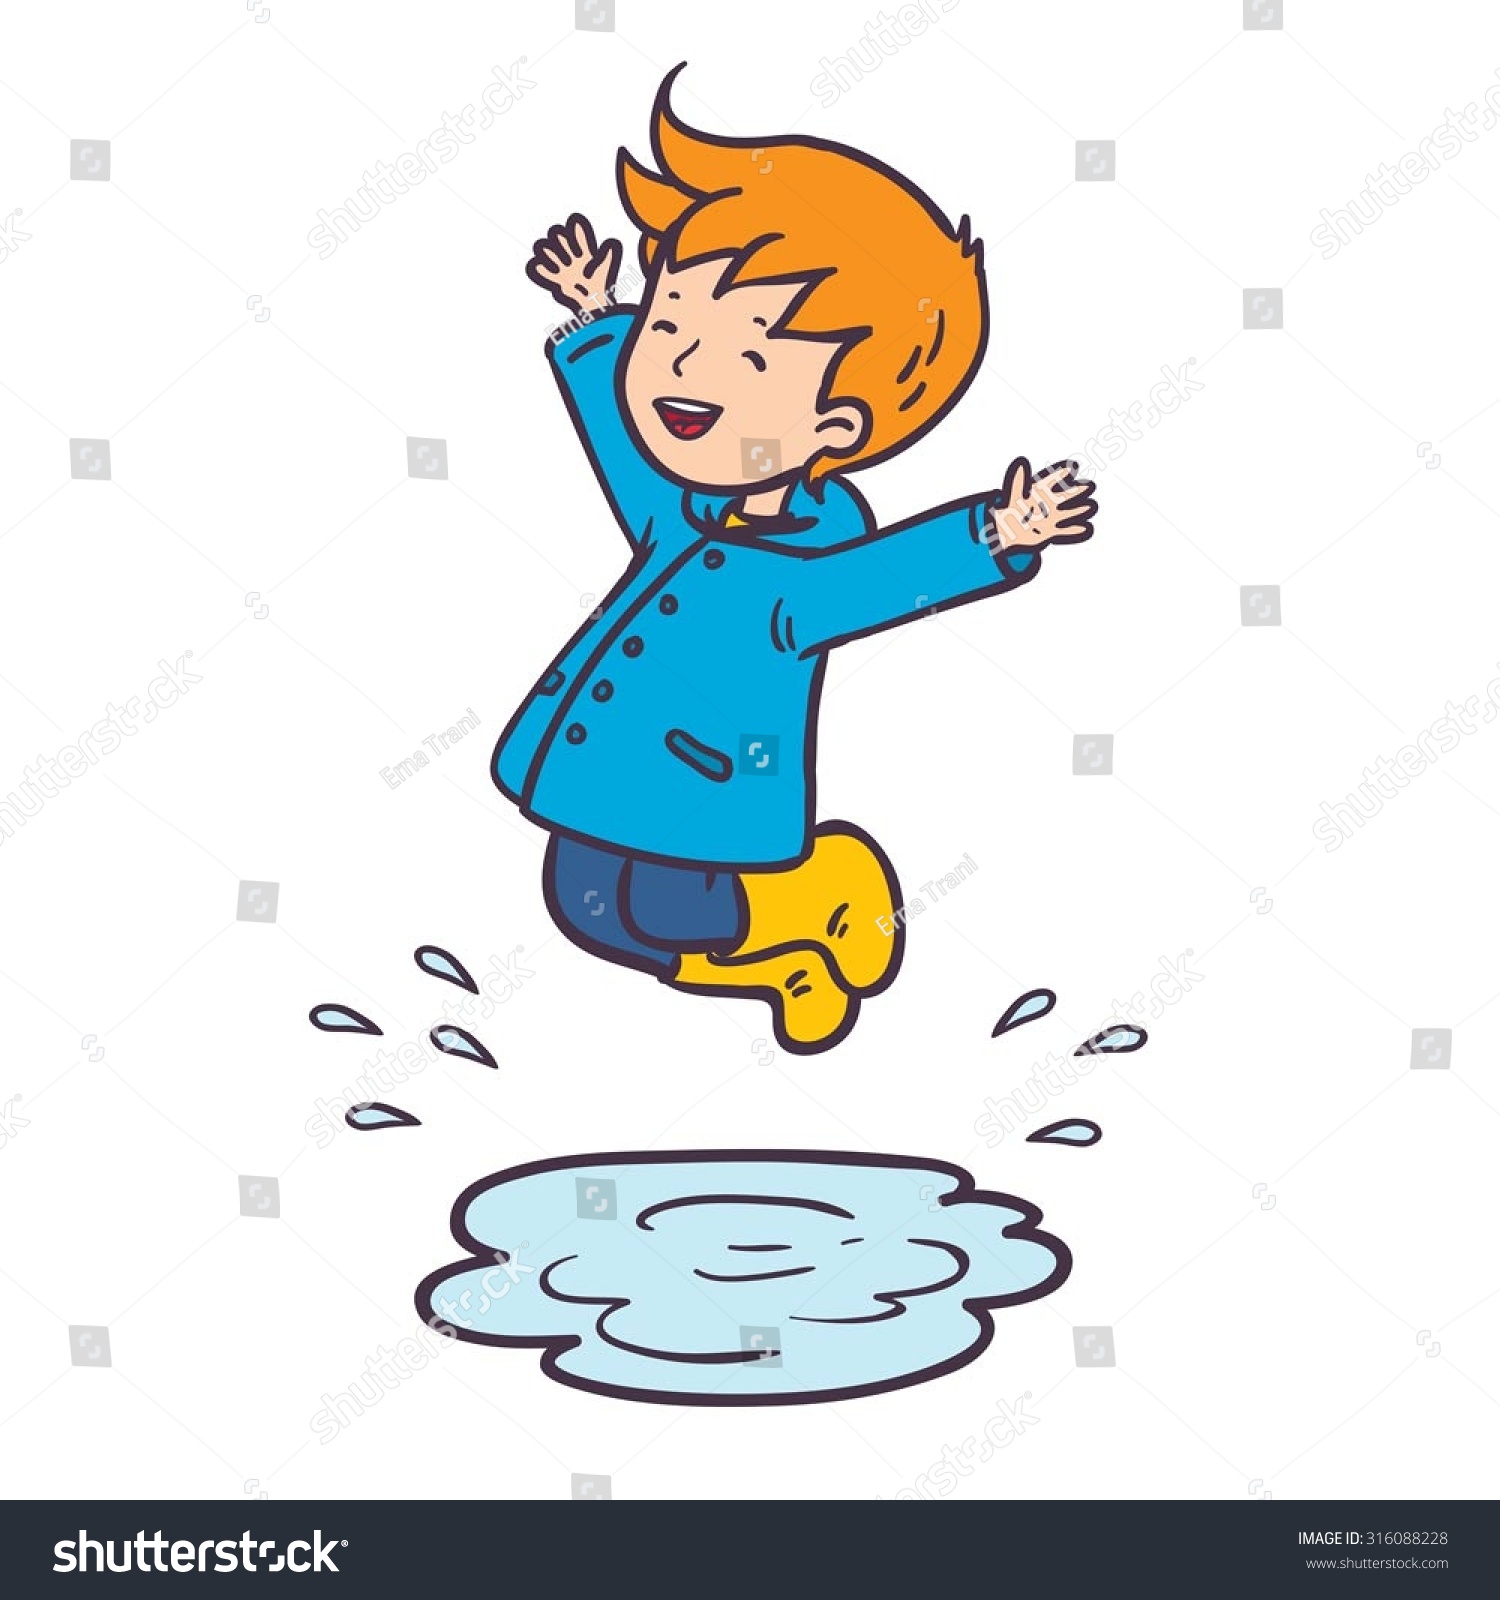 jump in clipart - photo #49